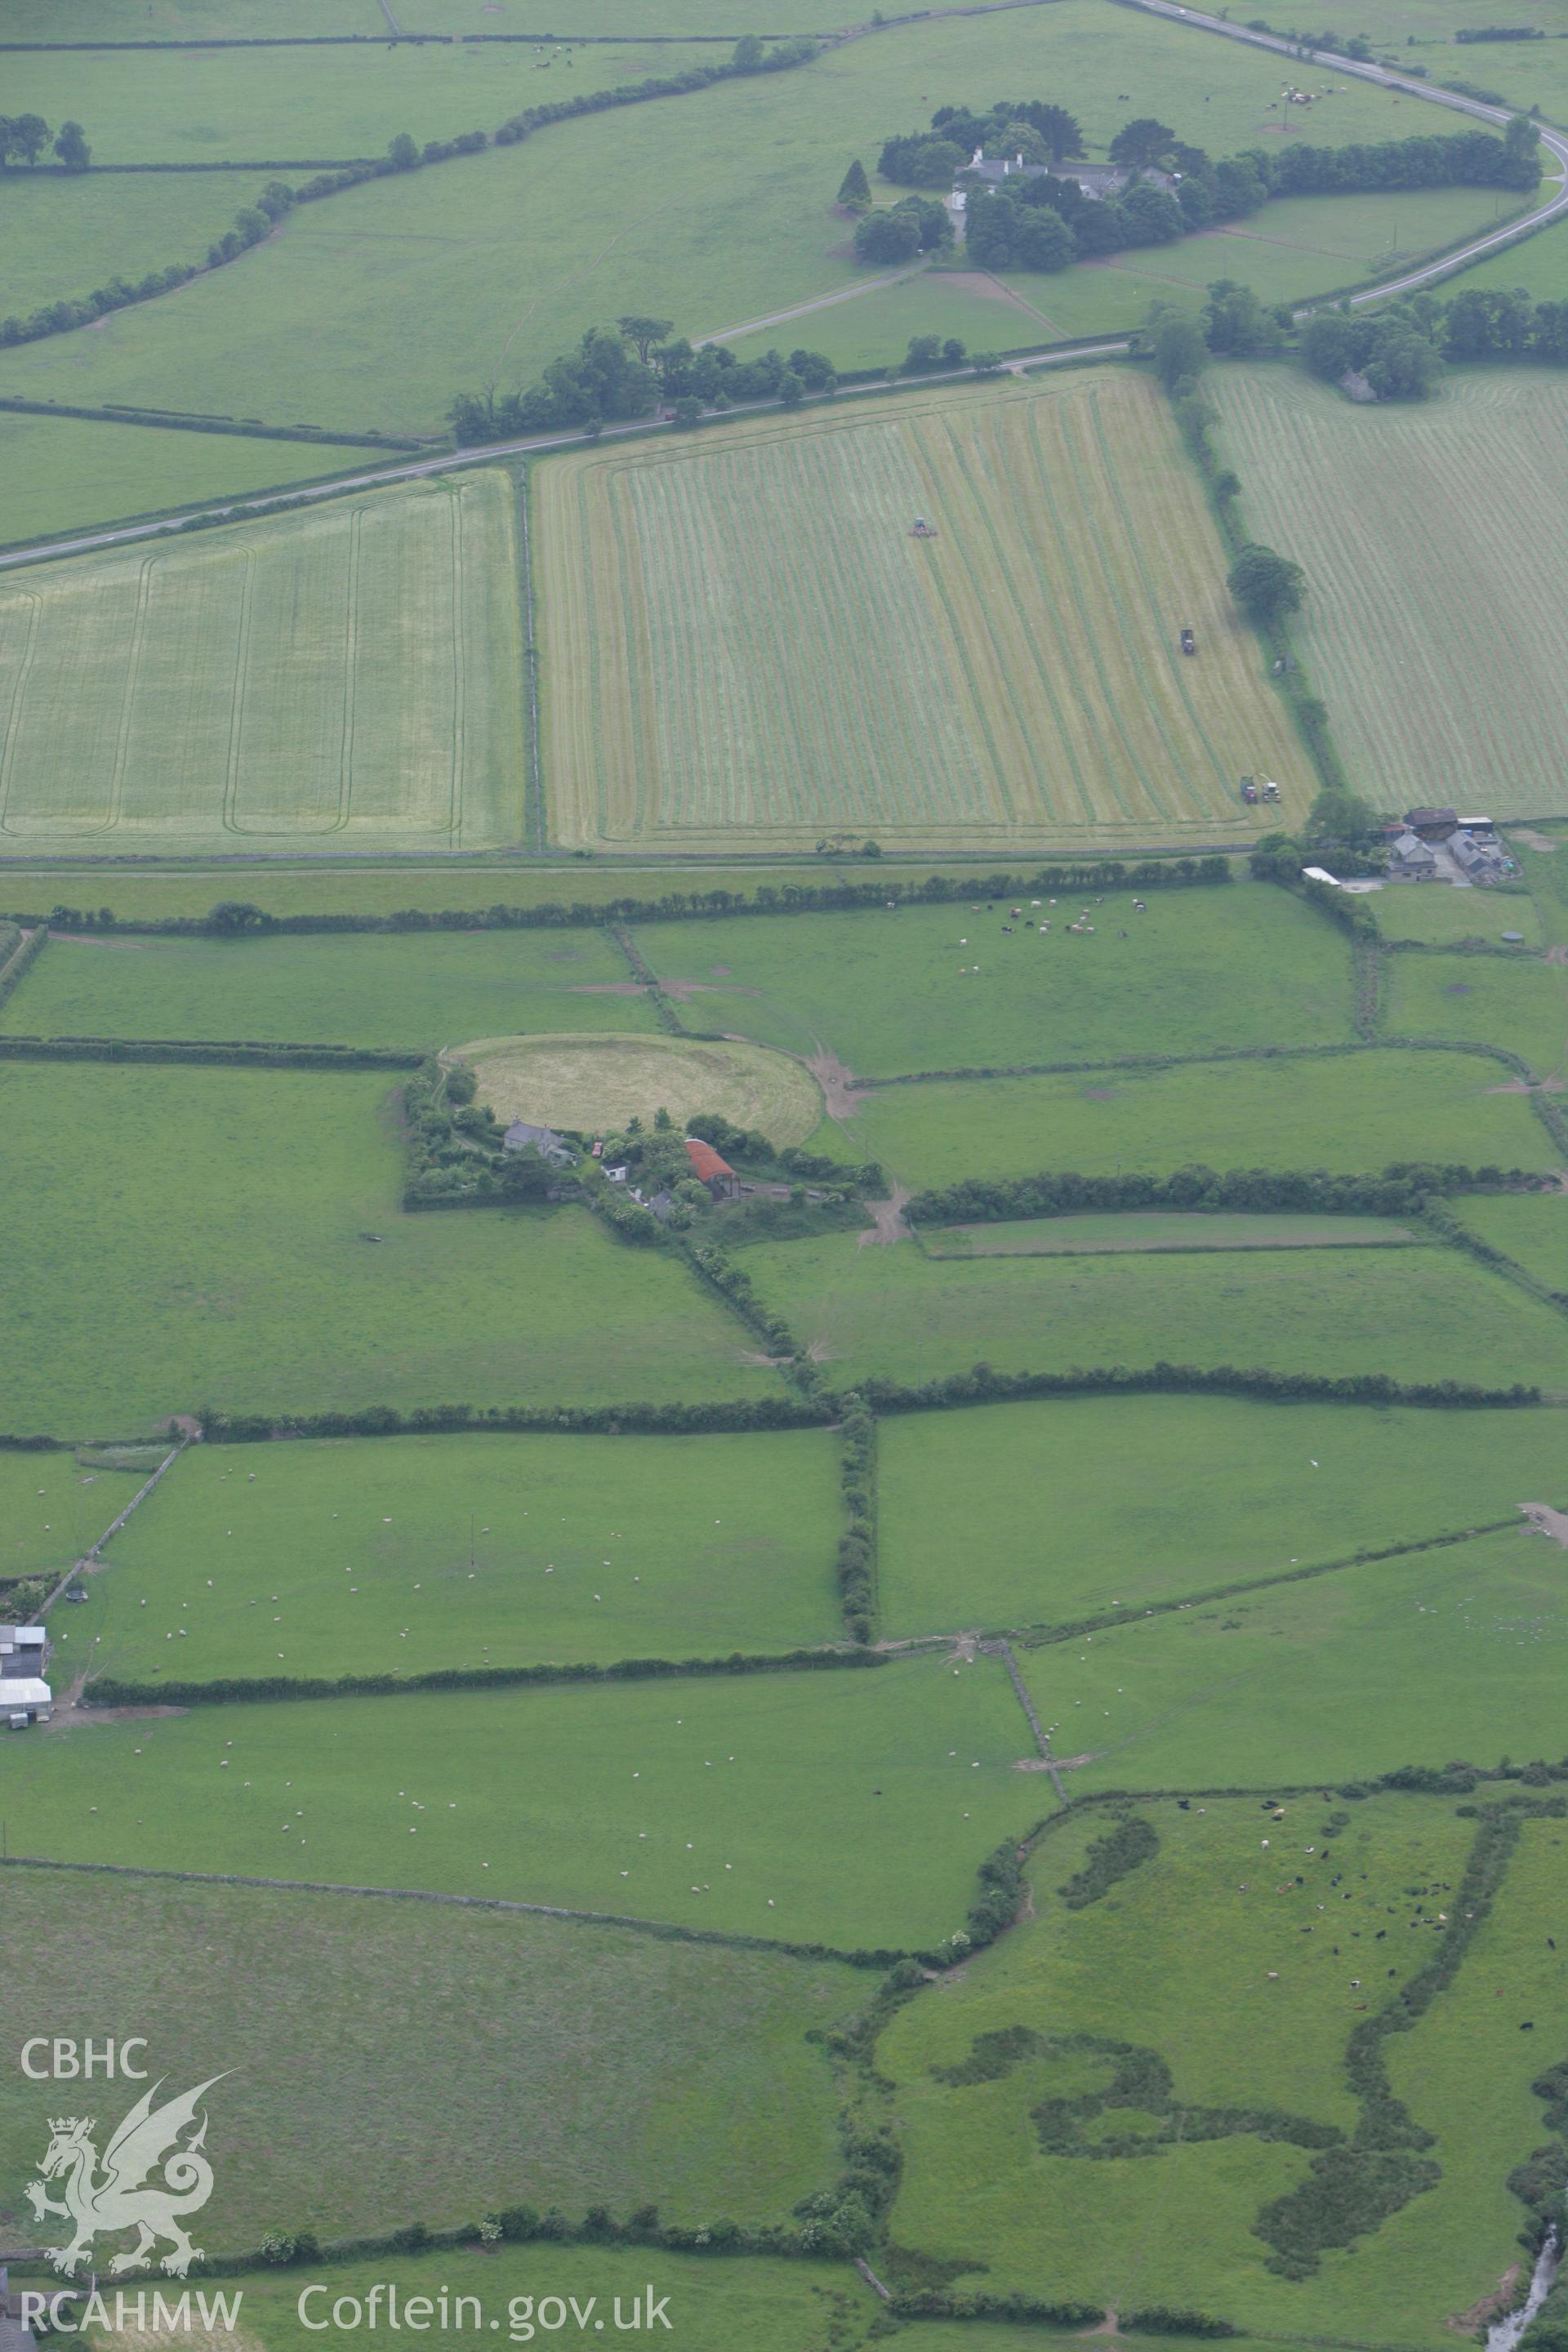 RCAHMW colour oblique photograph of Castell Bryn Gwyn, Neolithic henge and later ringwork. Taken by Toby Driver on 13/06/2008.